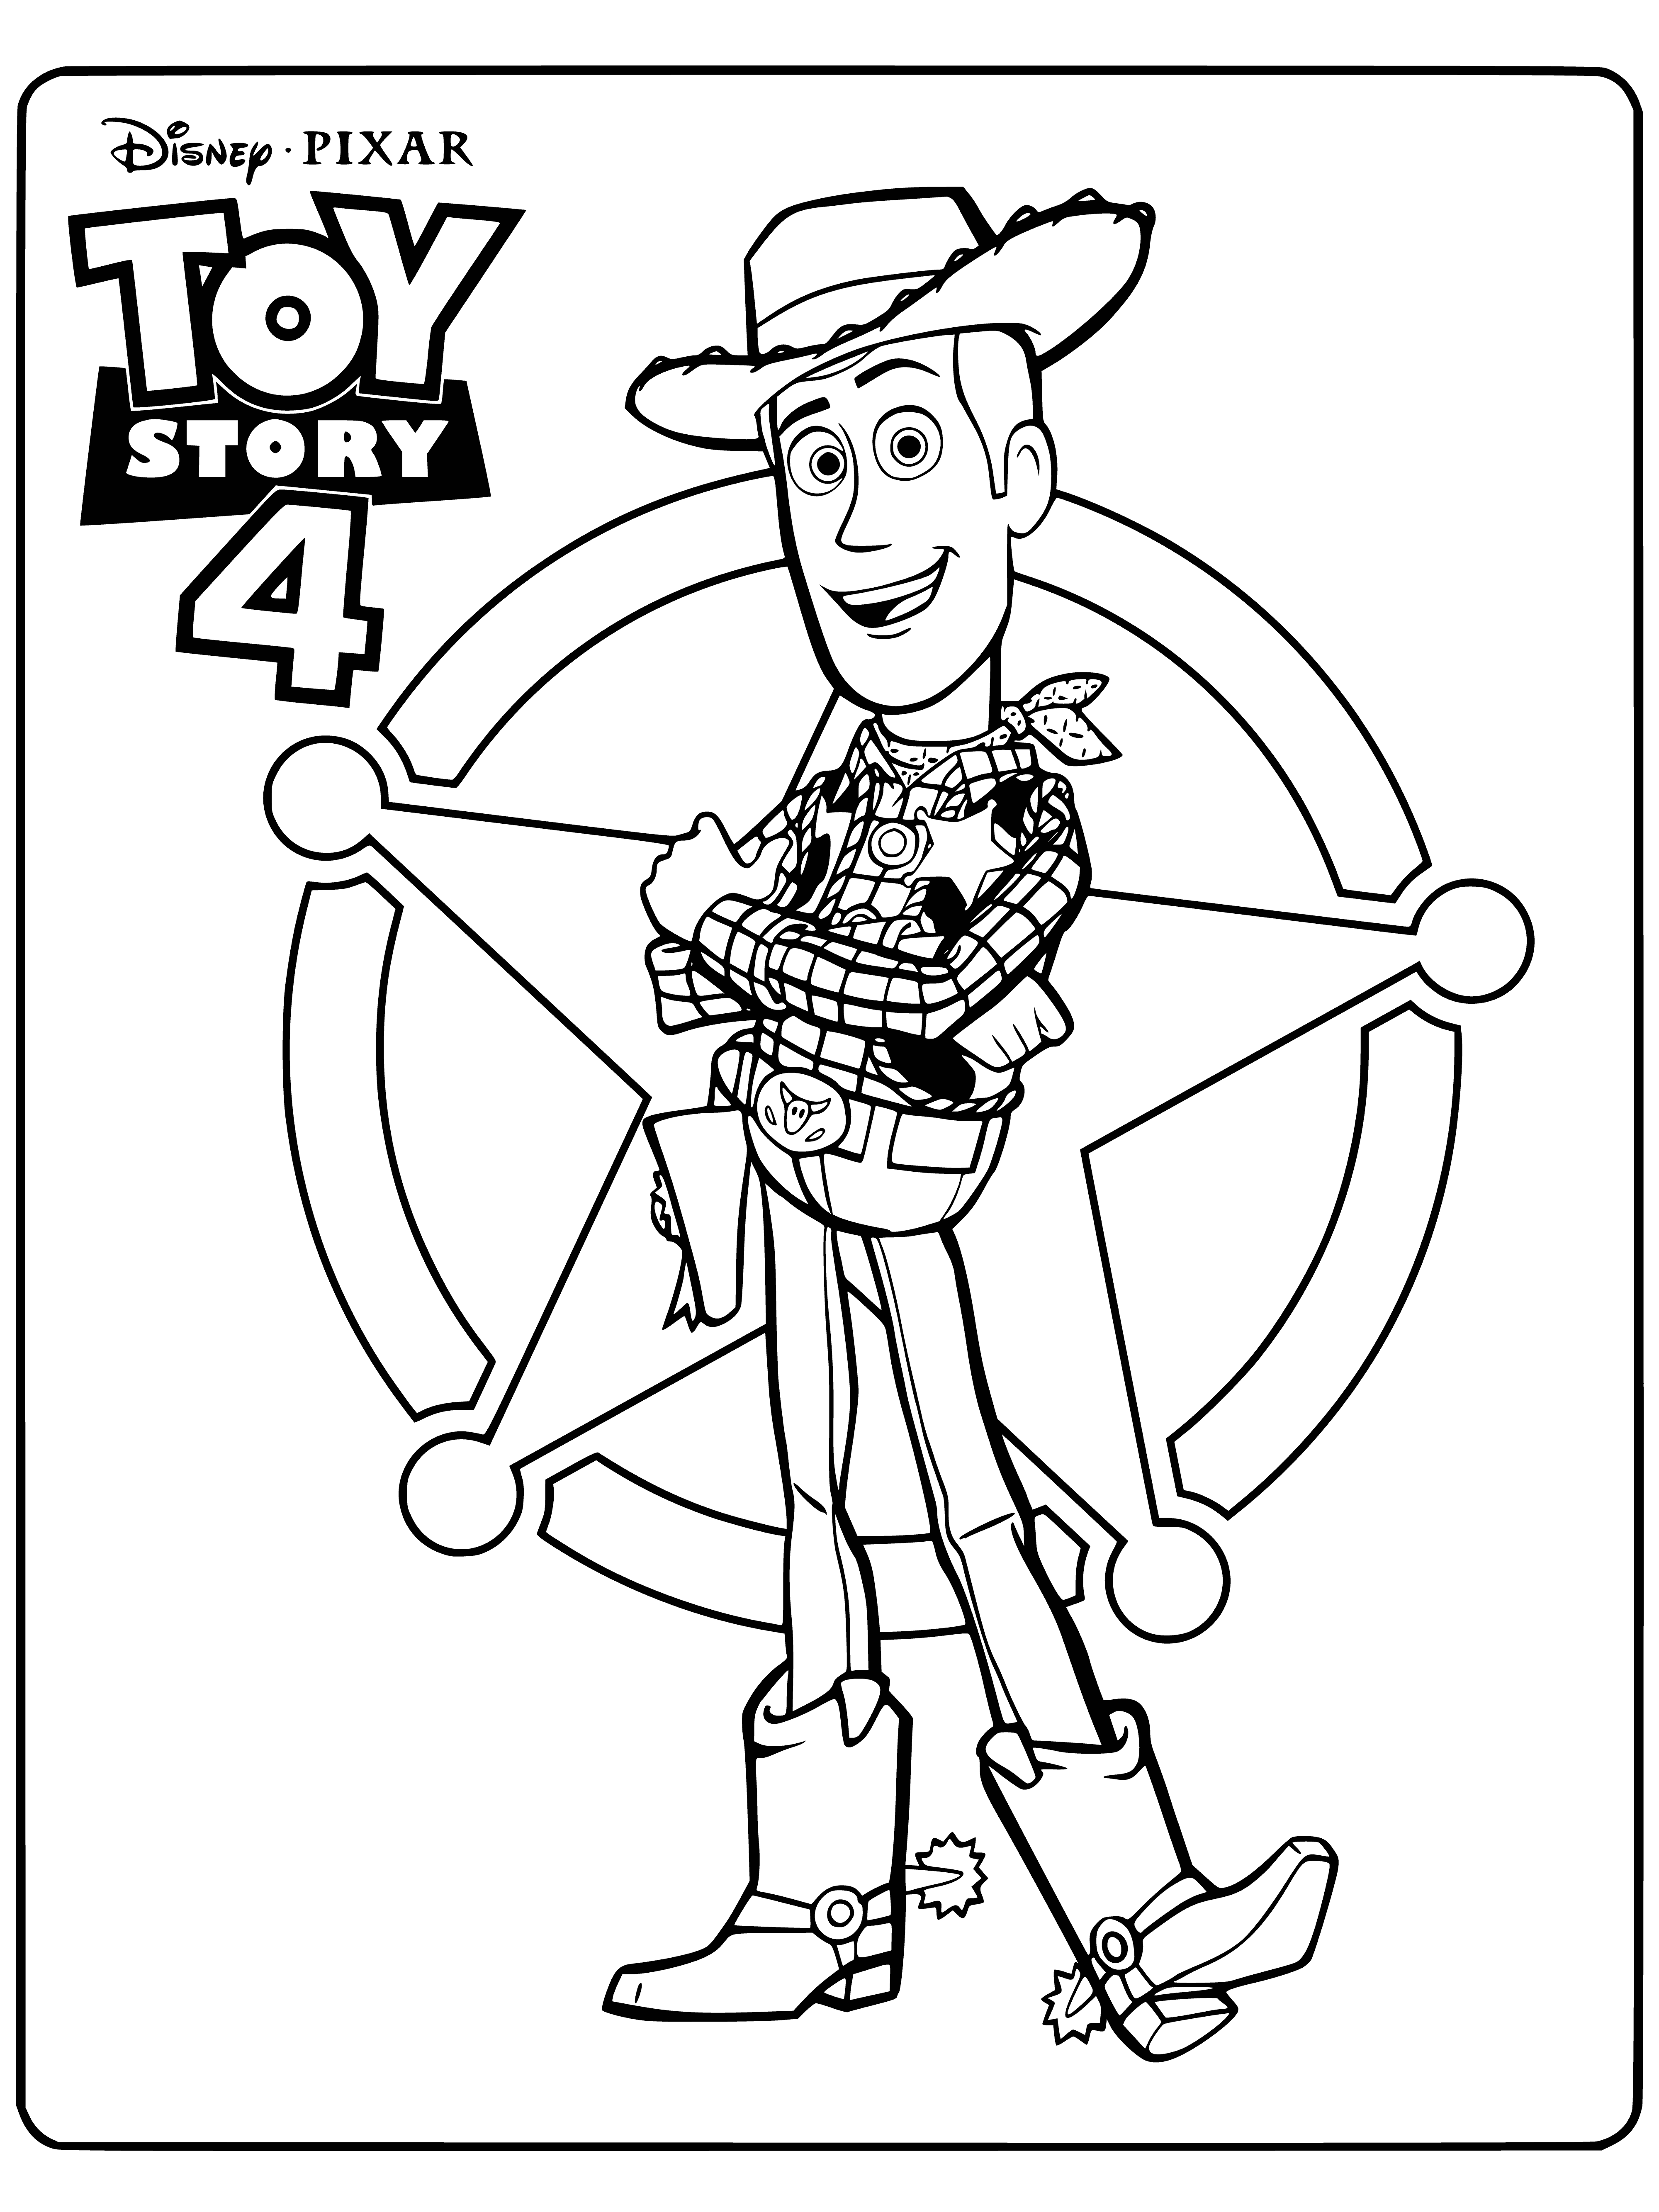 coloring page: Three toy cowboys & horses on a grassy field w/ trees. Cowboy wears yellow bandana, green hat and holds rope. Horses rearing up & head down.